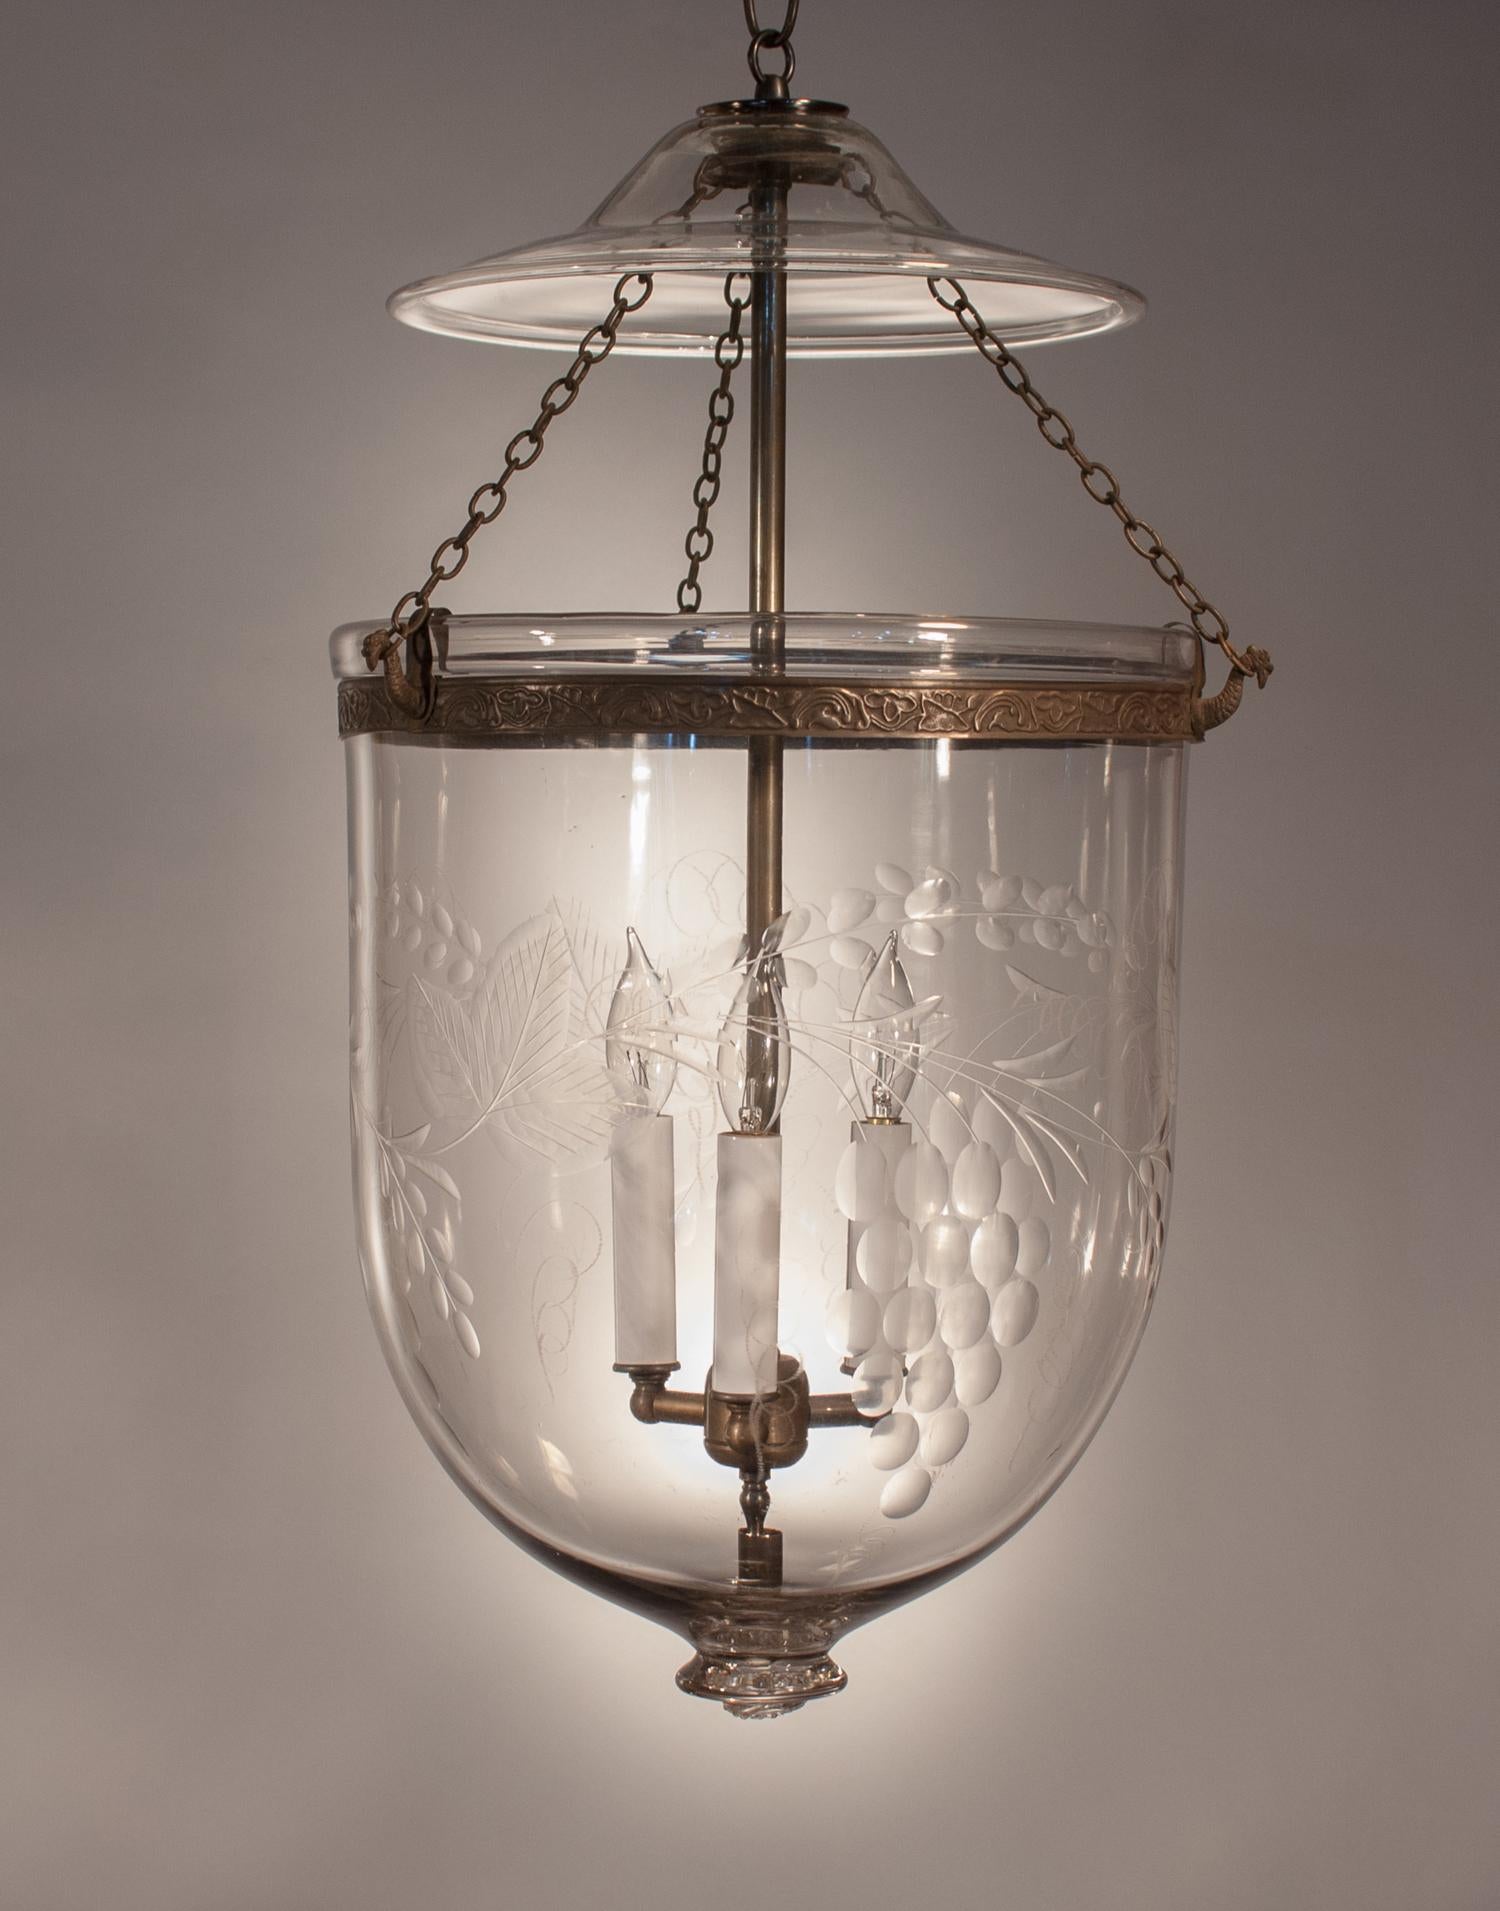 A substantial English handblown glass bell jar lantern with lovely form and an attractive grape with leaf polished etching. The hall lantern has its original smoke bell. Its chains and brass band, which has an embossed vine design, have been